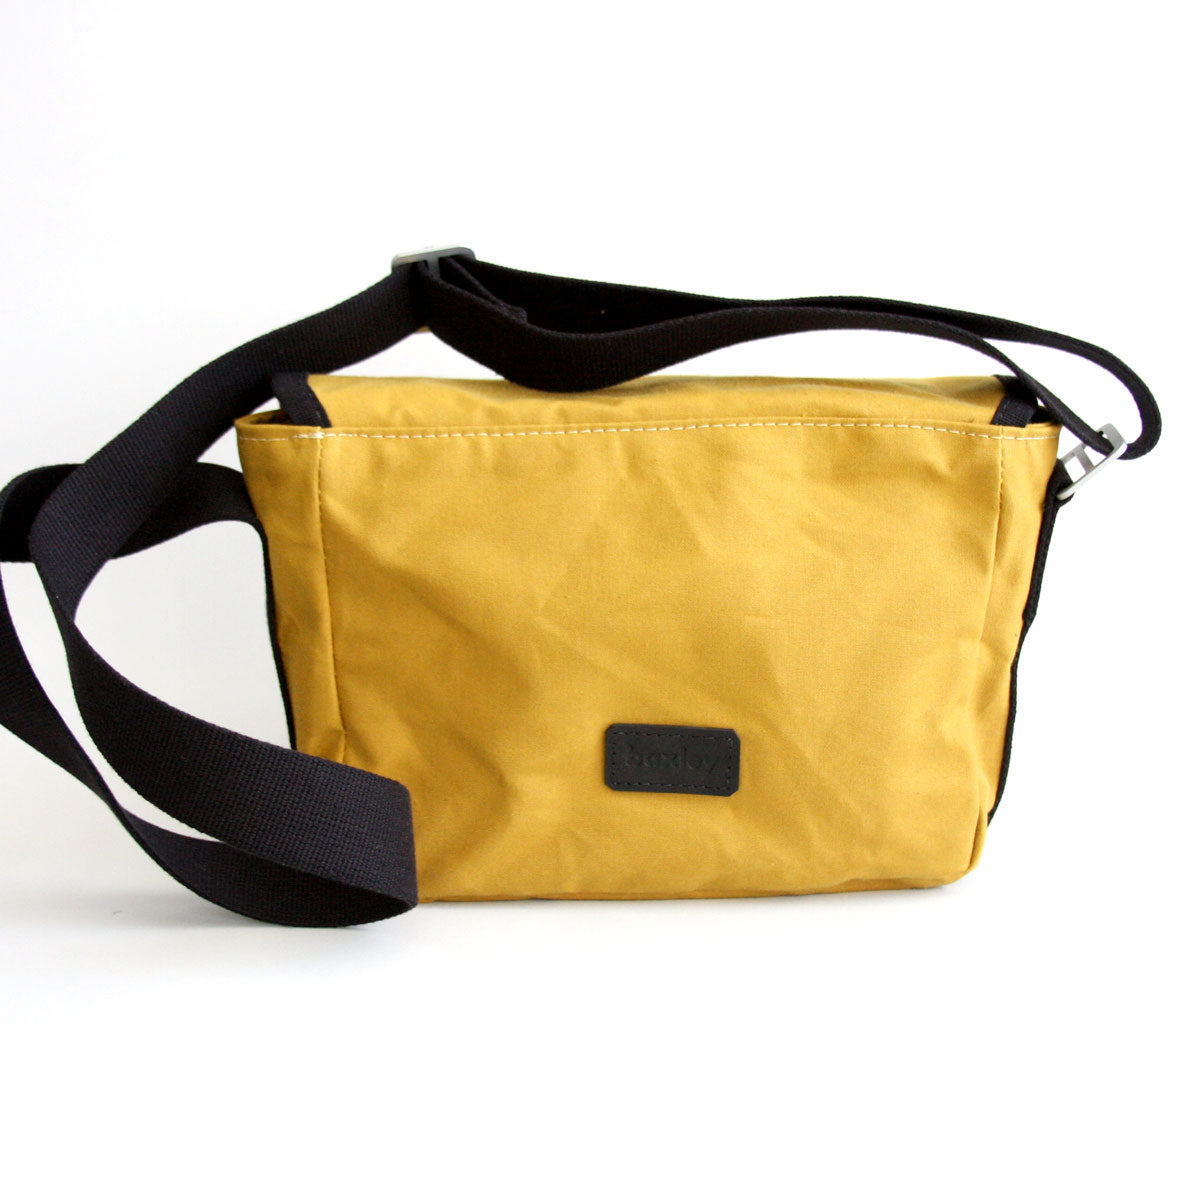 Rear view of Gertie the crossbody satchel from Baxley in cumin and black